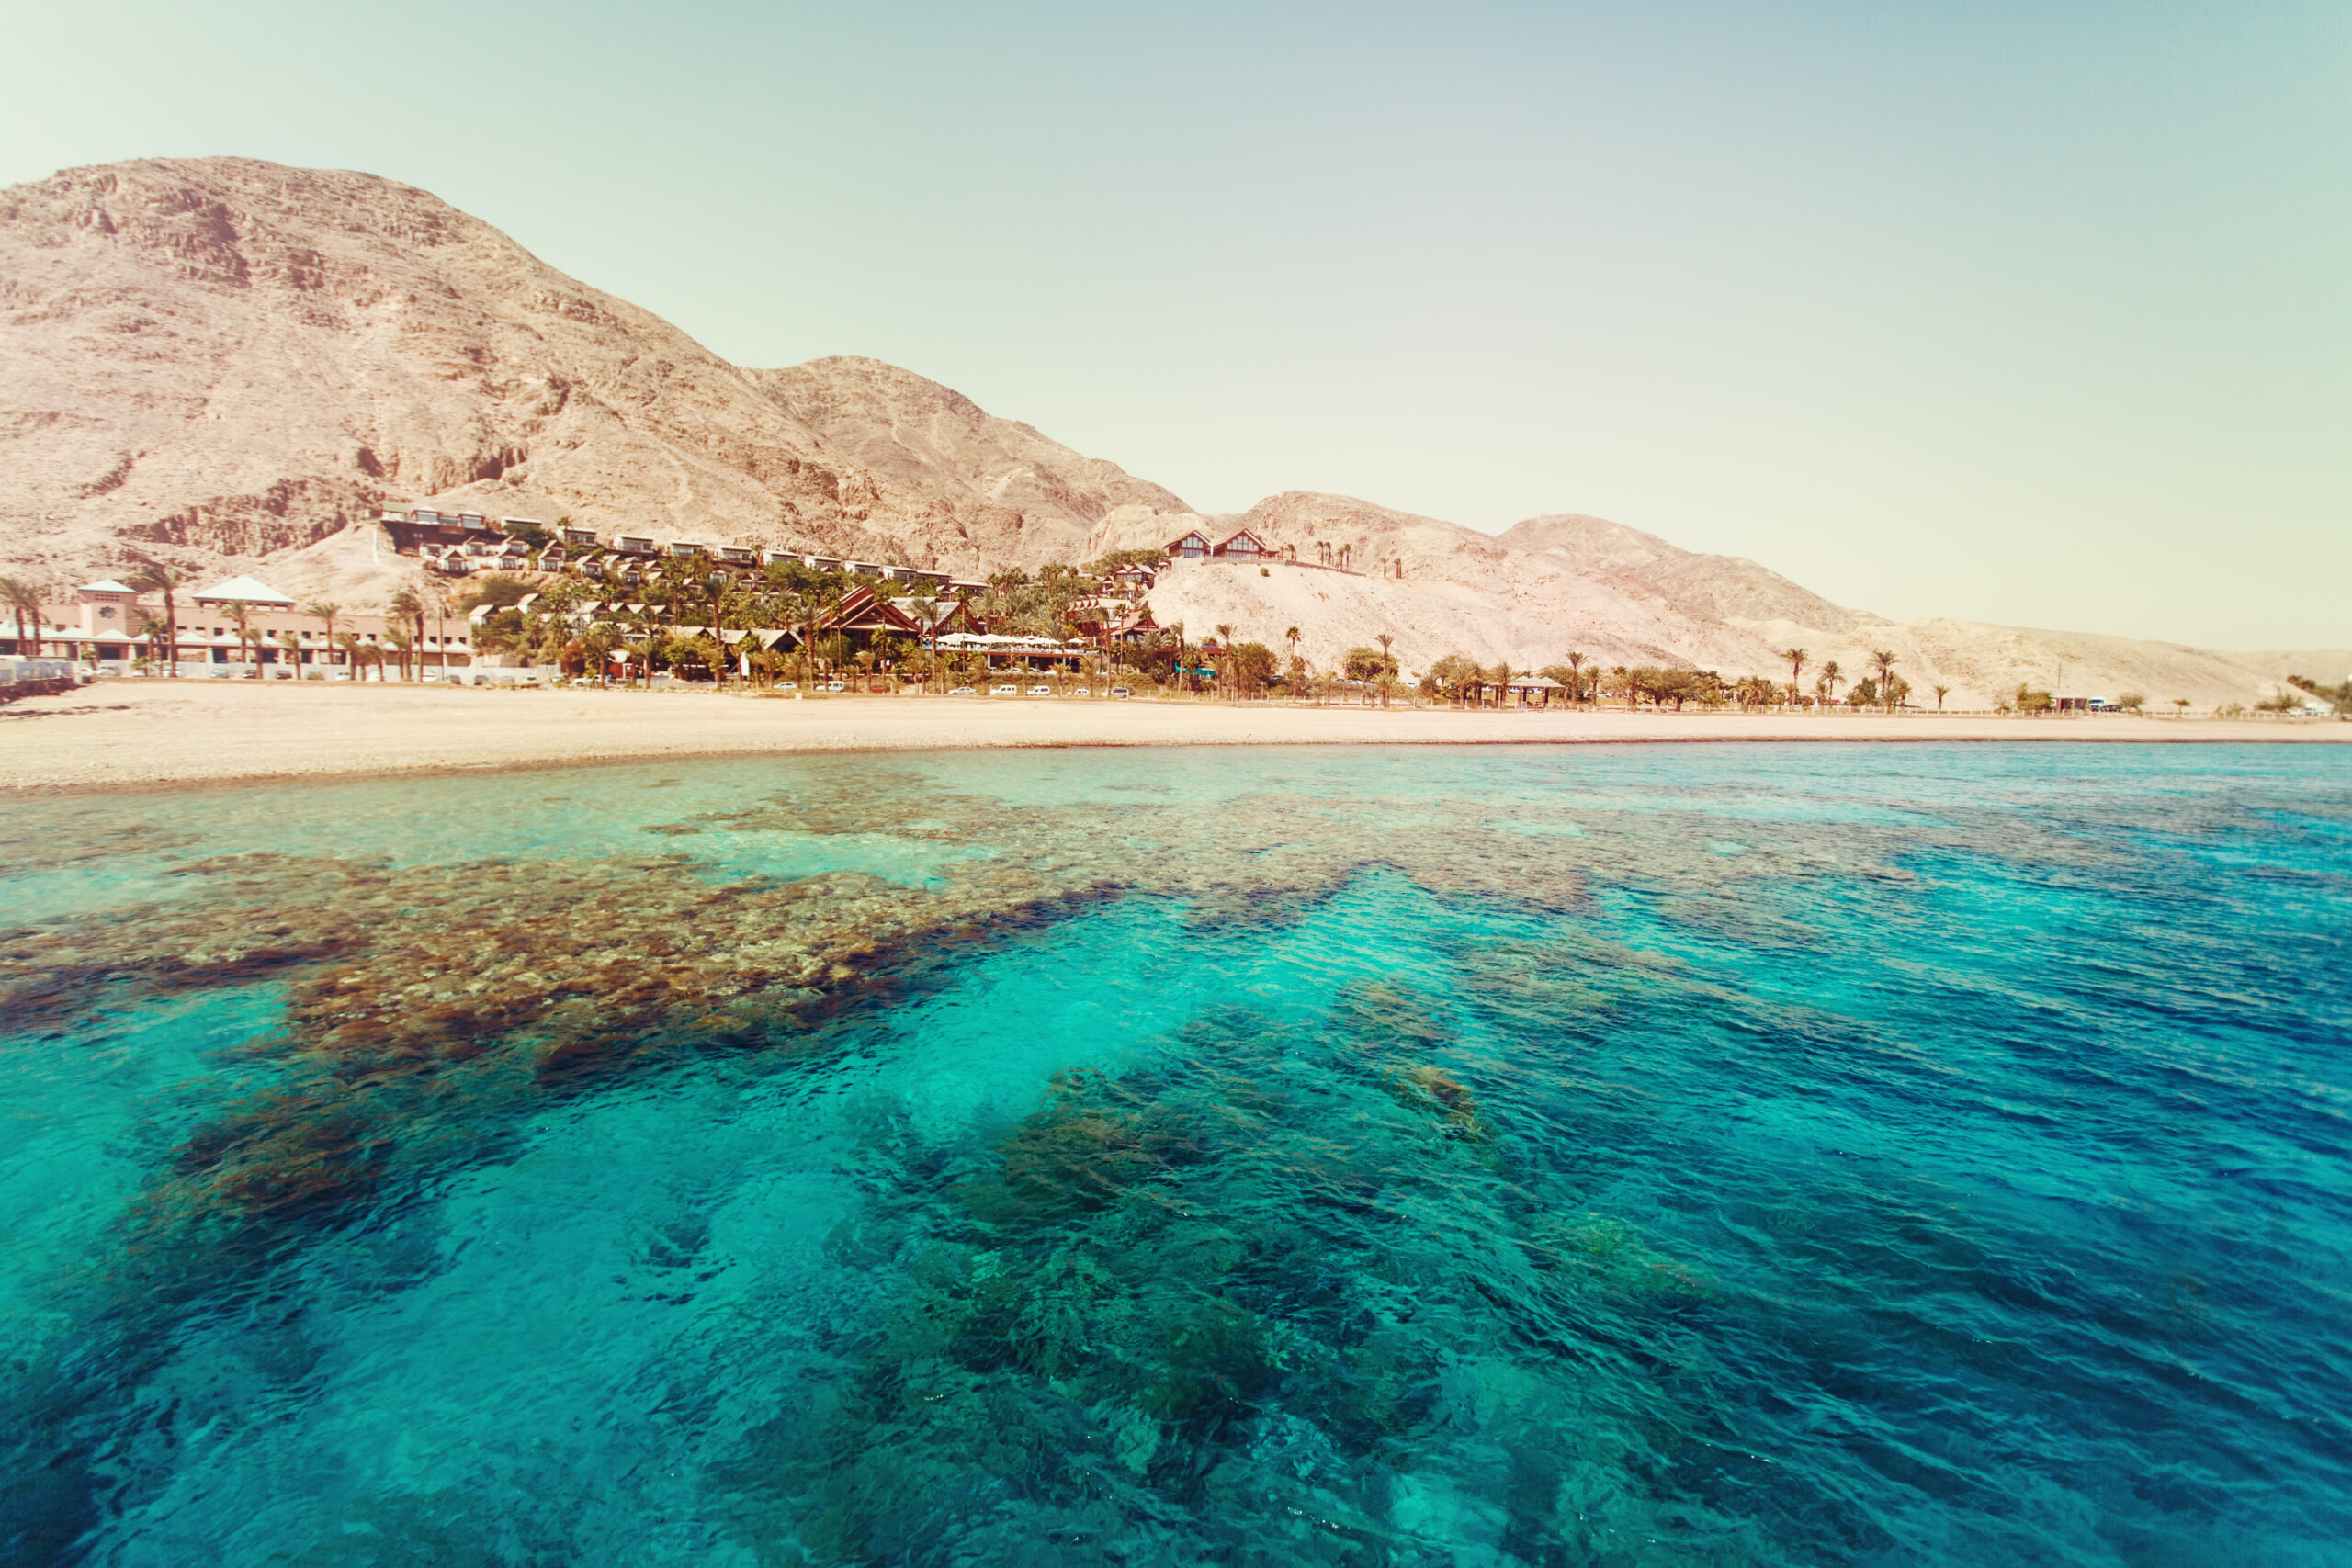 Red Sea with Coral Reefs. Israel. Palm Trees and Mountain View from the Sea. Vintage Retro Toned Image. Selective focus.